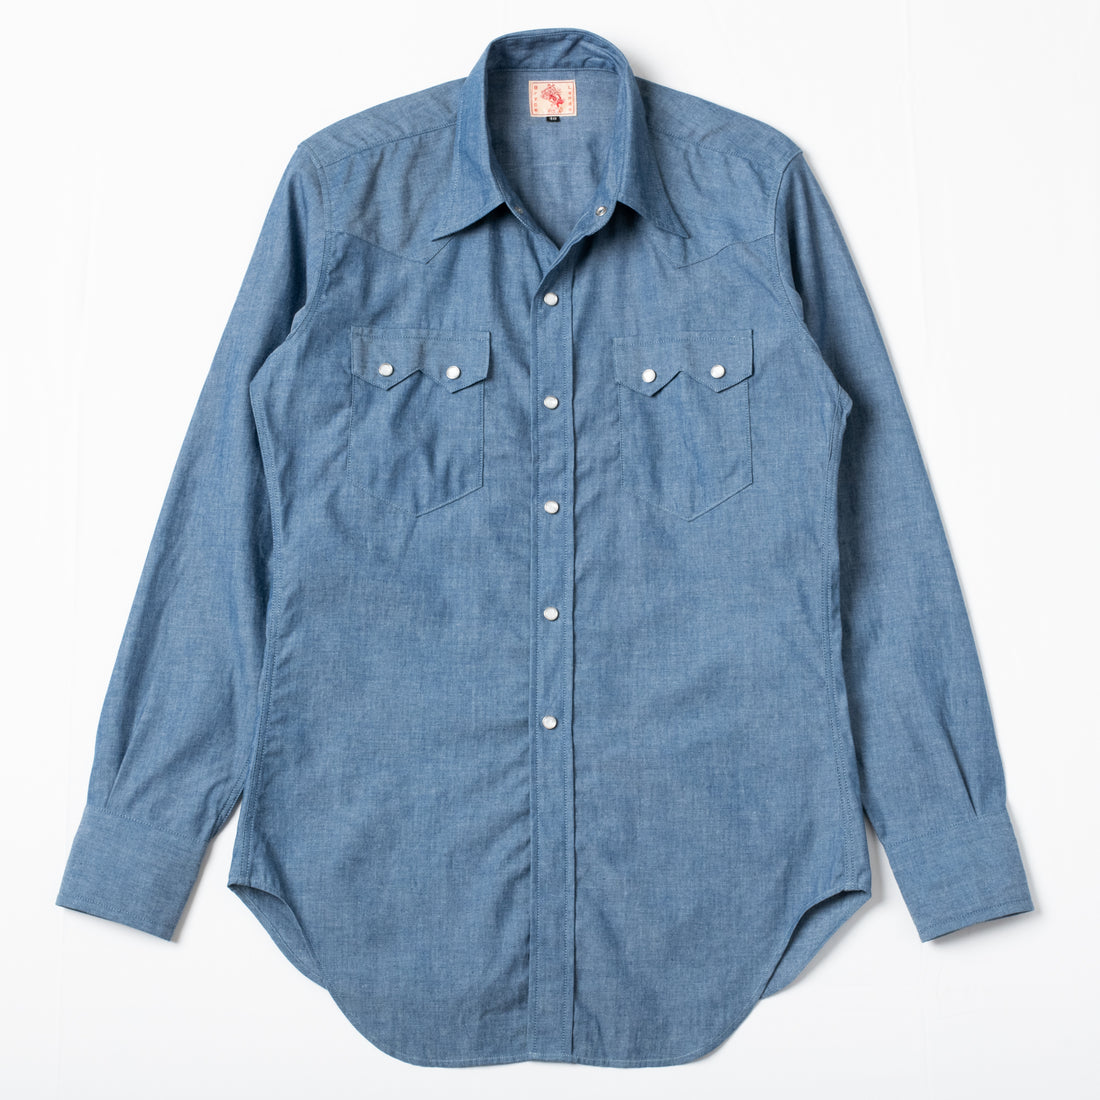 Bryceland's Sawtooth Westerner Chambray